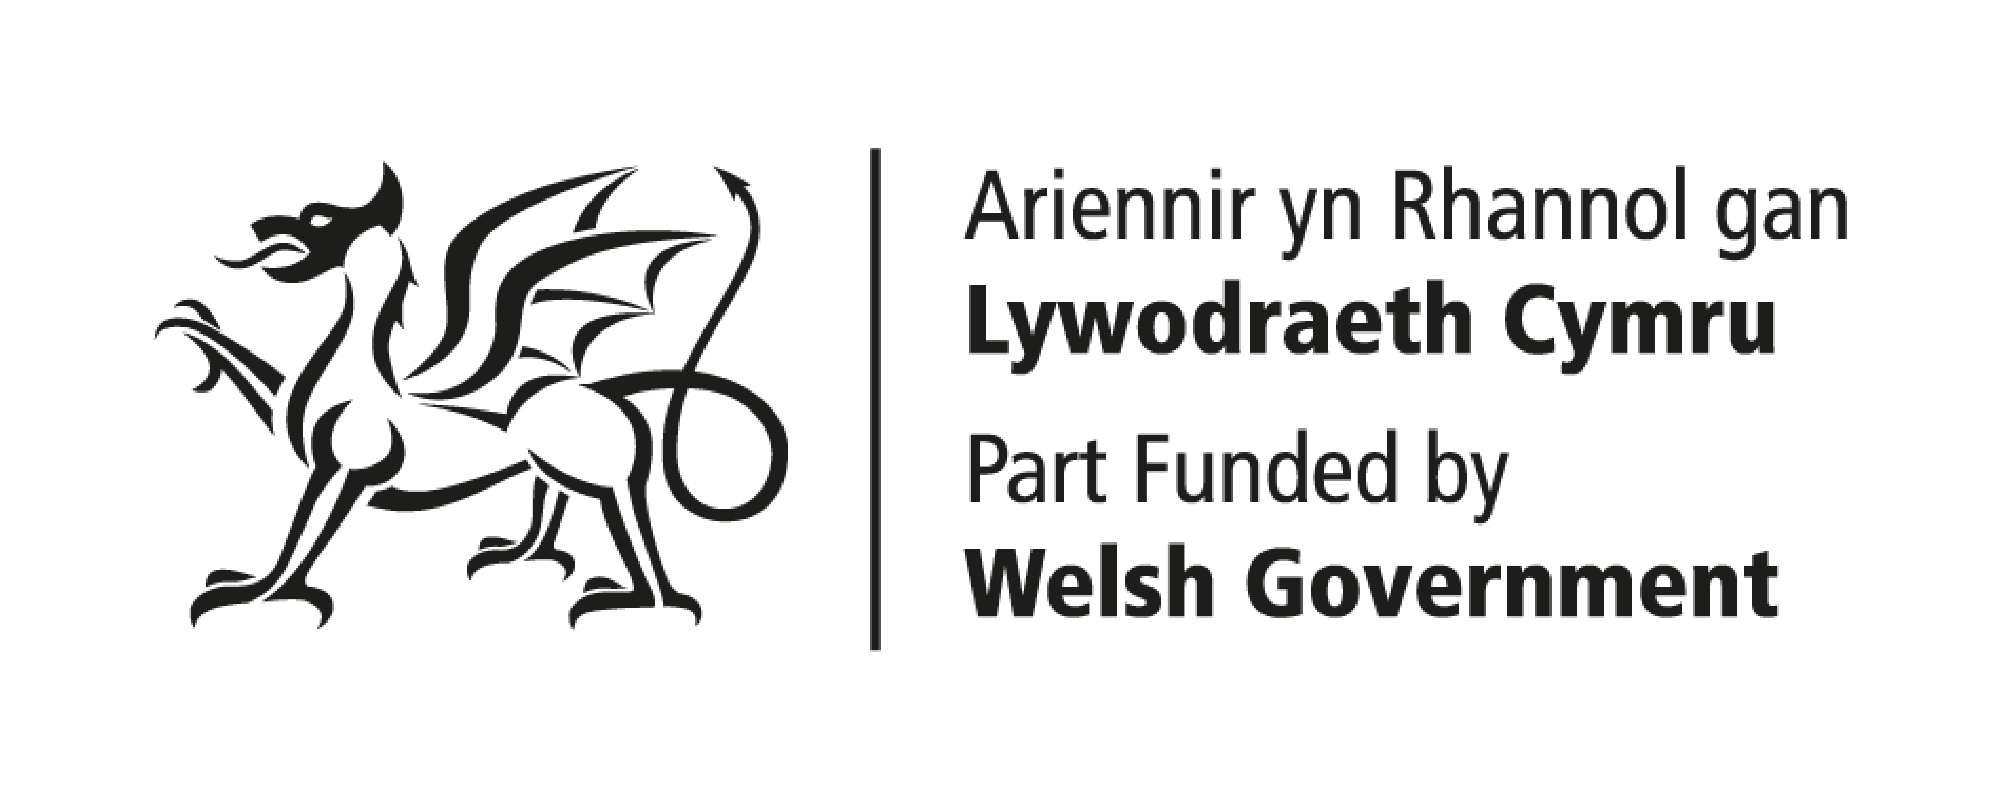 Welsh Government Part Funded (resized 5).png